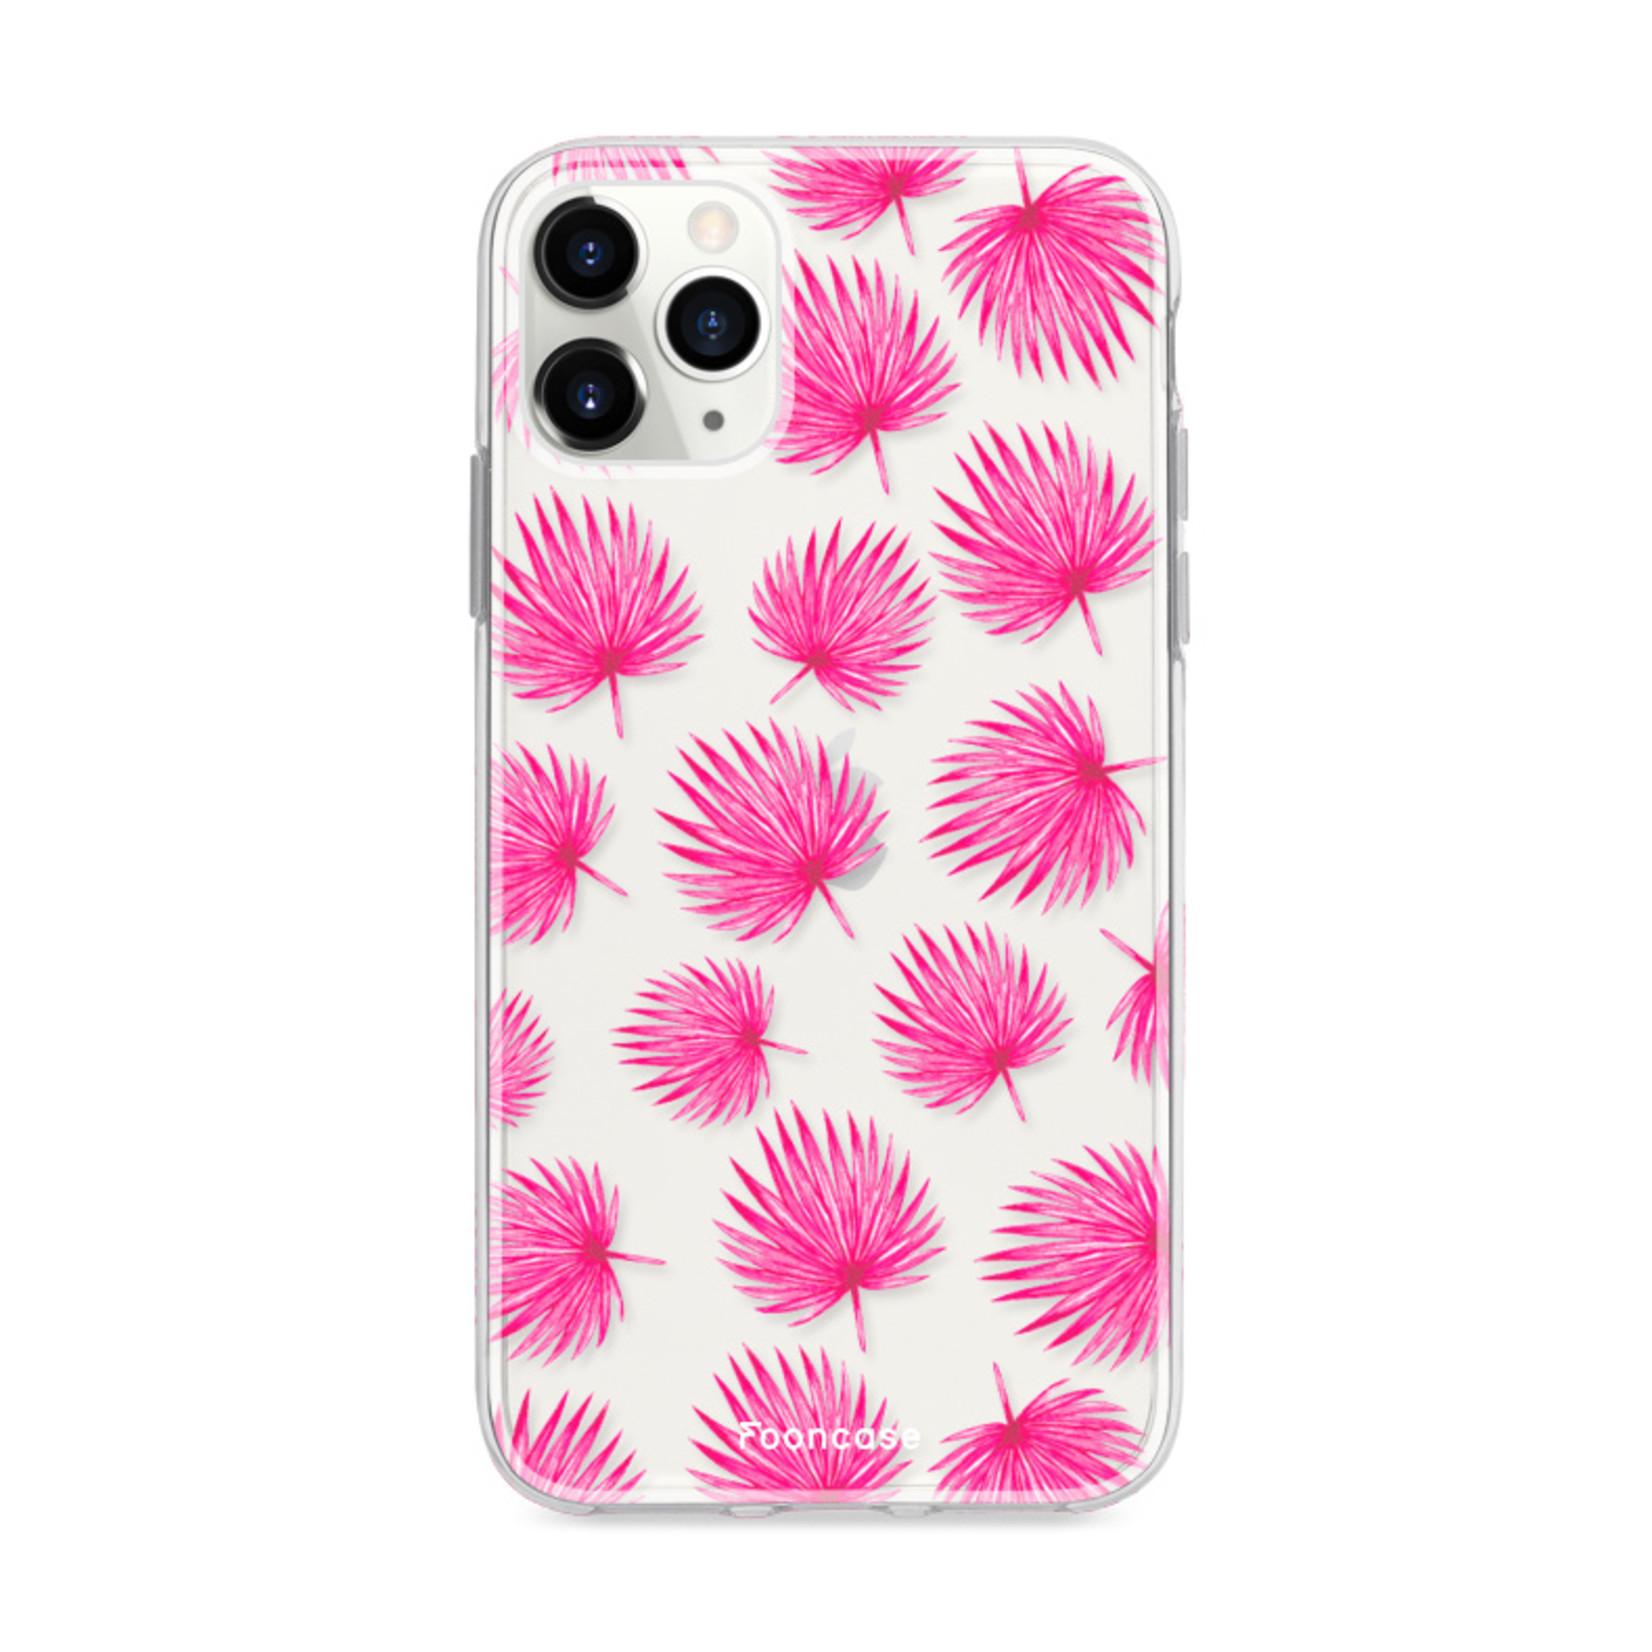 FOONCASE IPhone 12 Pro Max Case - Pink leaves